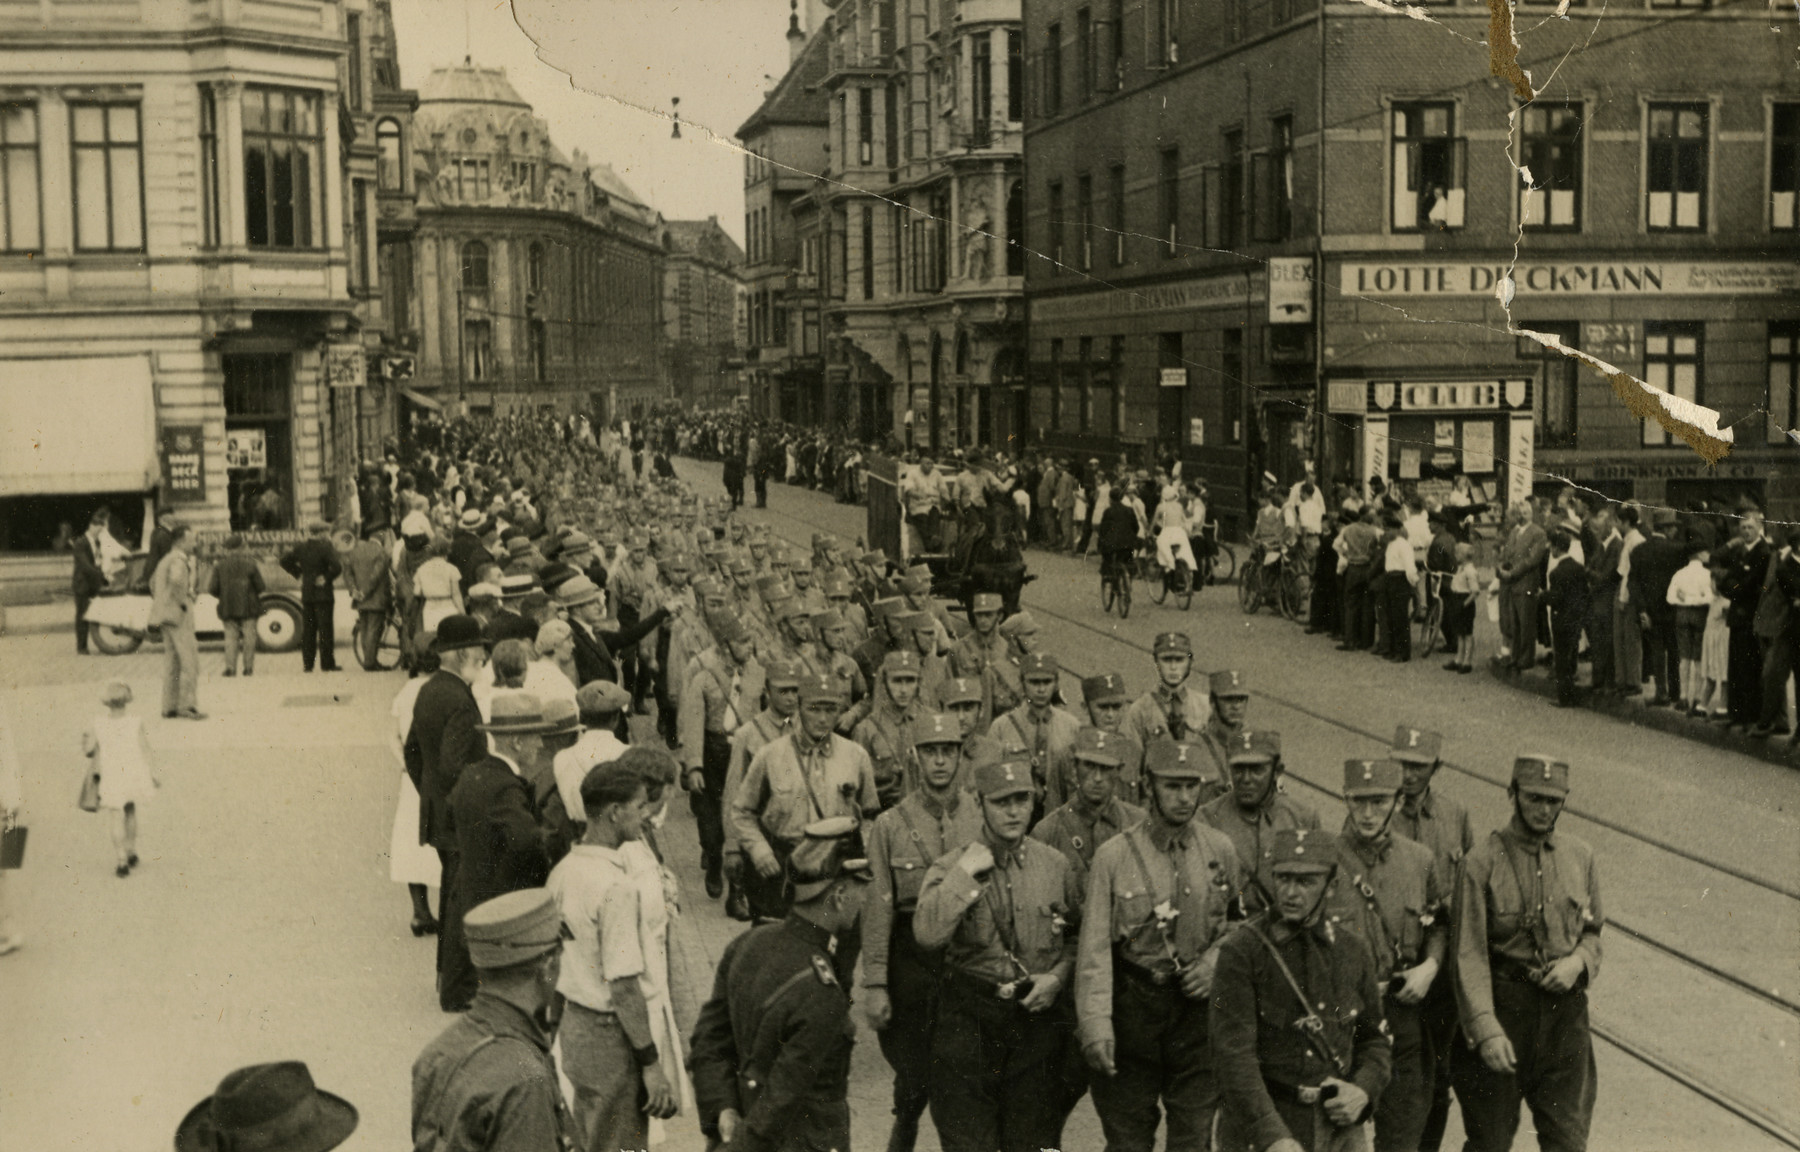 Street view of Nazi soldiers marching through the streets of Bremen, Germany in 1932.

Original caption on album page reads, "1932 Germany." Bottom-most photo caption reads, "A gathering of Hitler supporters in Hamburg before election in 1932." Top photo caption reads "Hitler Soldiers marching the street at Bremen; Irving and I saw their parade."